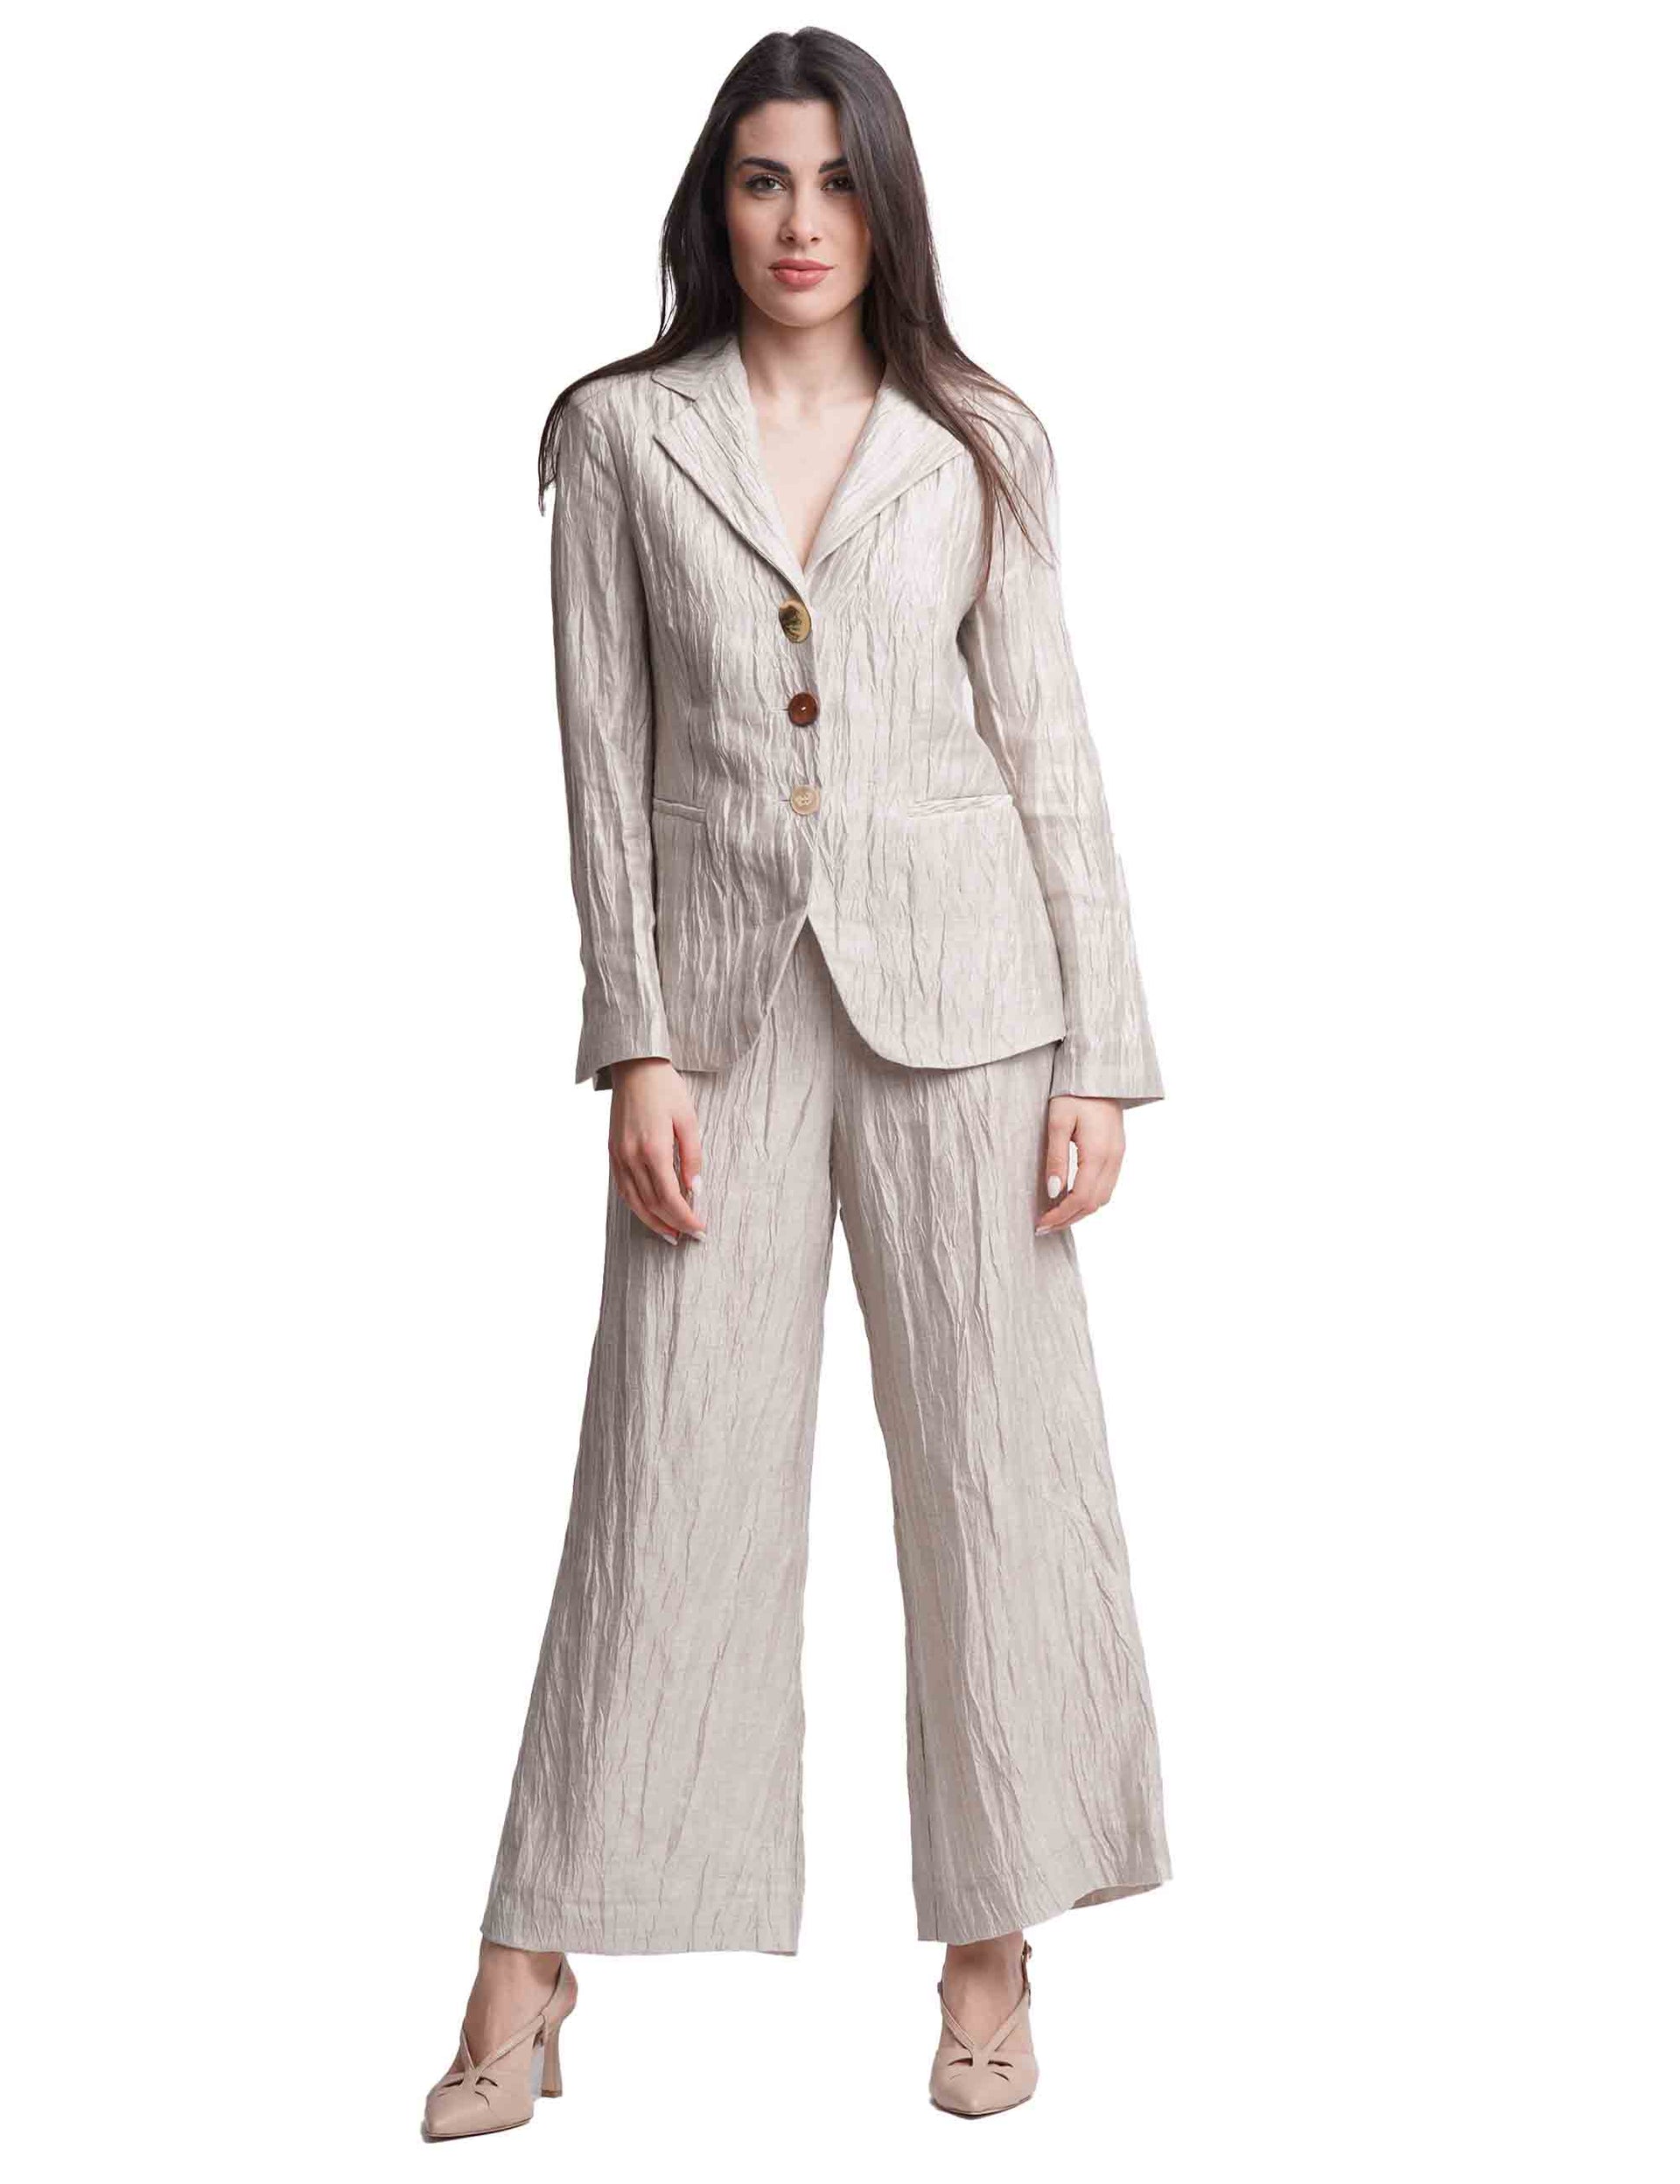 Froisse women's single-breasted jackets in white linen